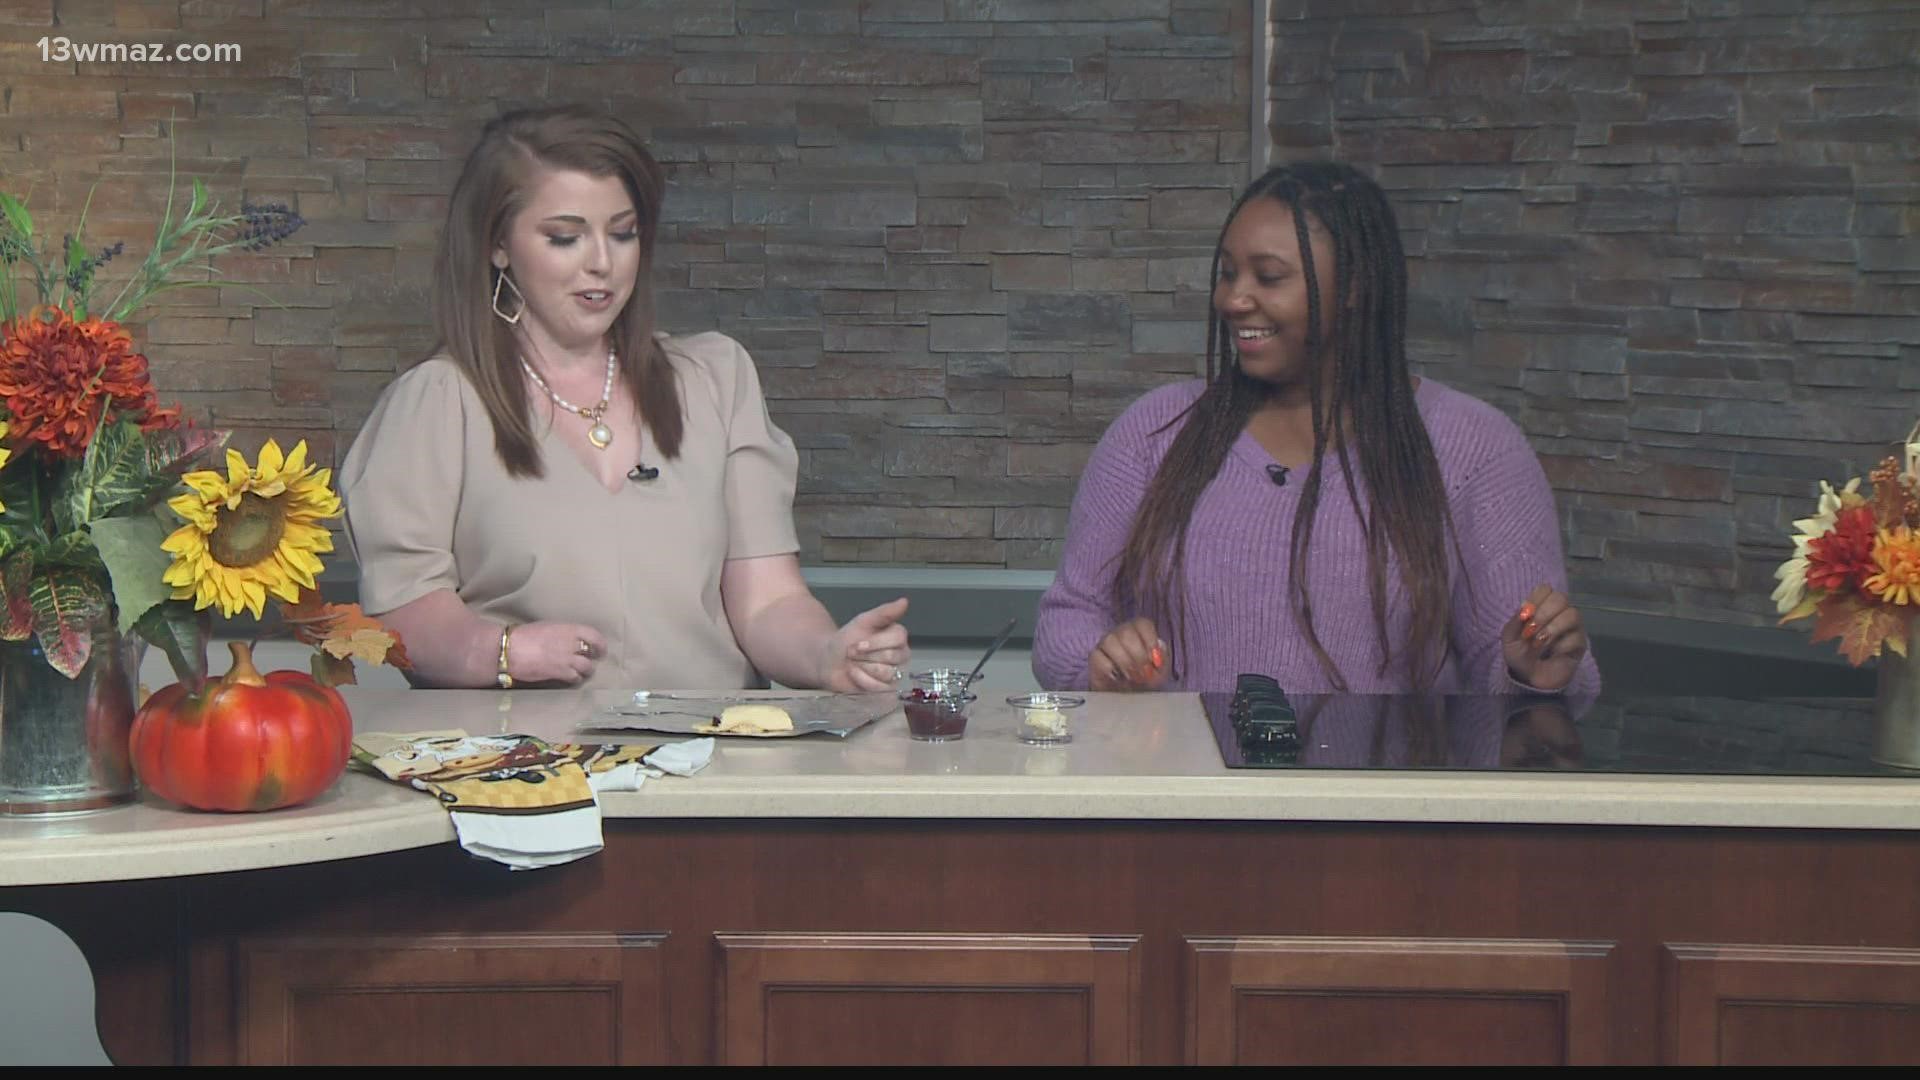 Katelyn shares her recipe for Cranberry Brie Rolls on this episode of "From Our Table to Yours."